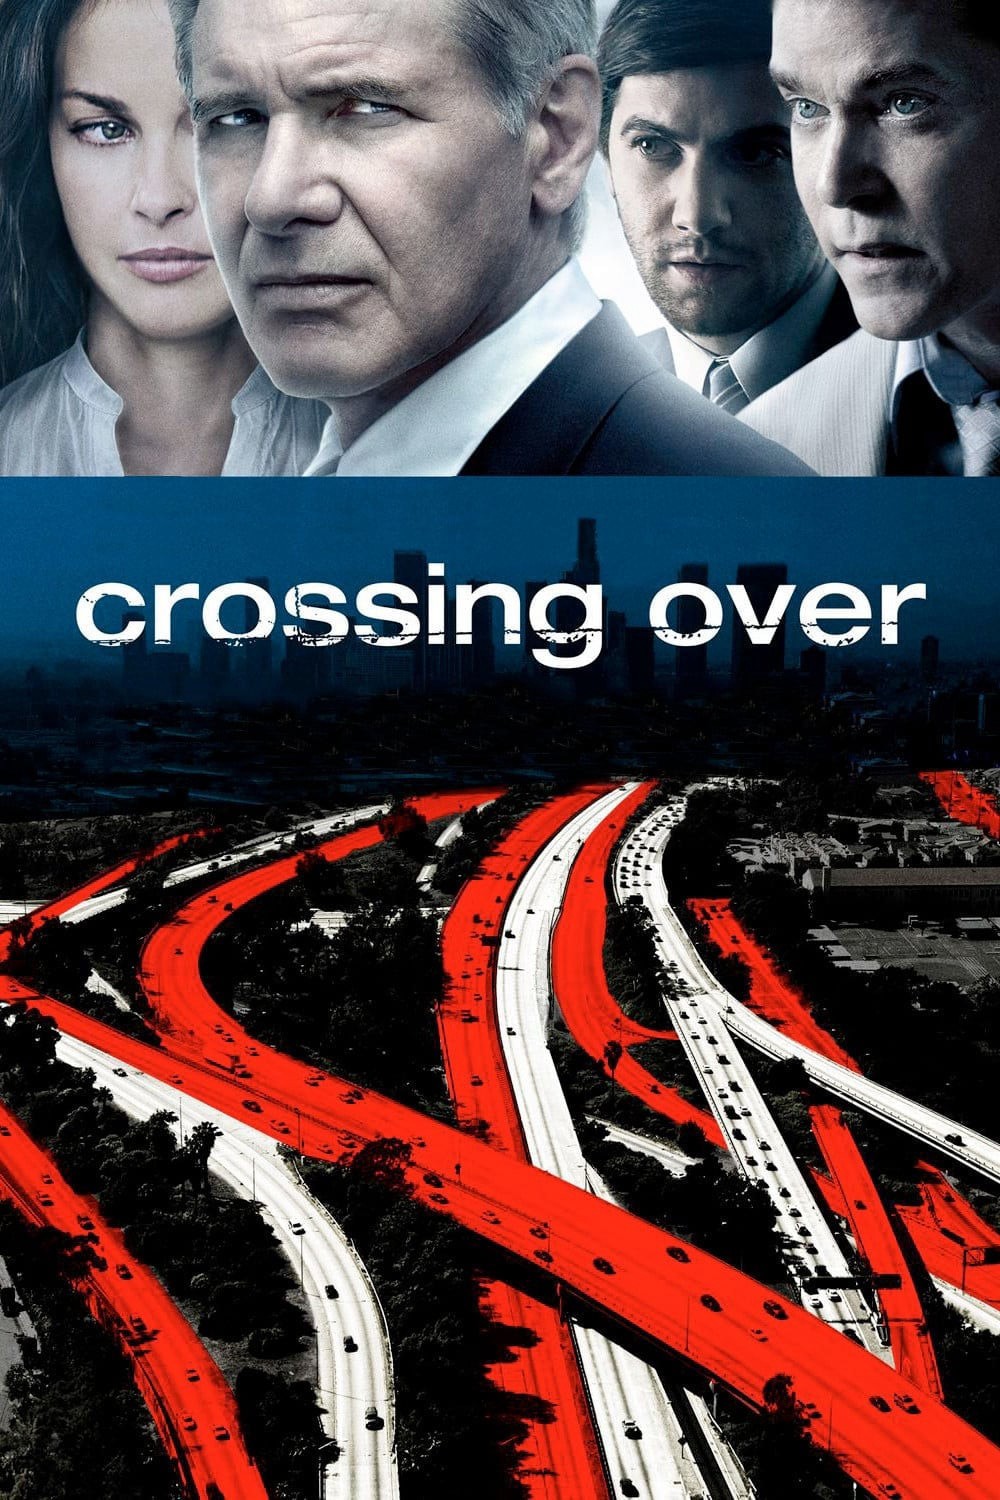 Crossing Over (Crossing Over) [2009]